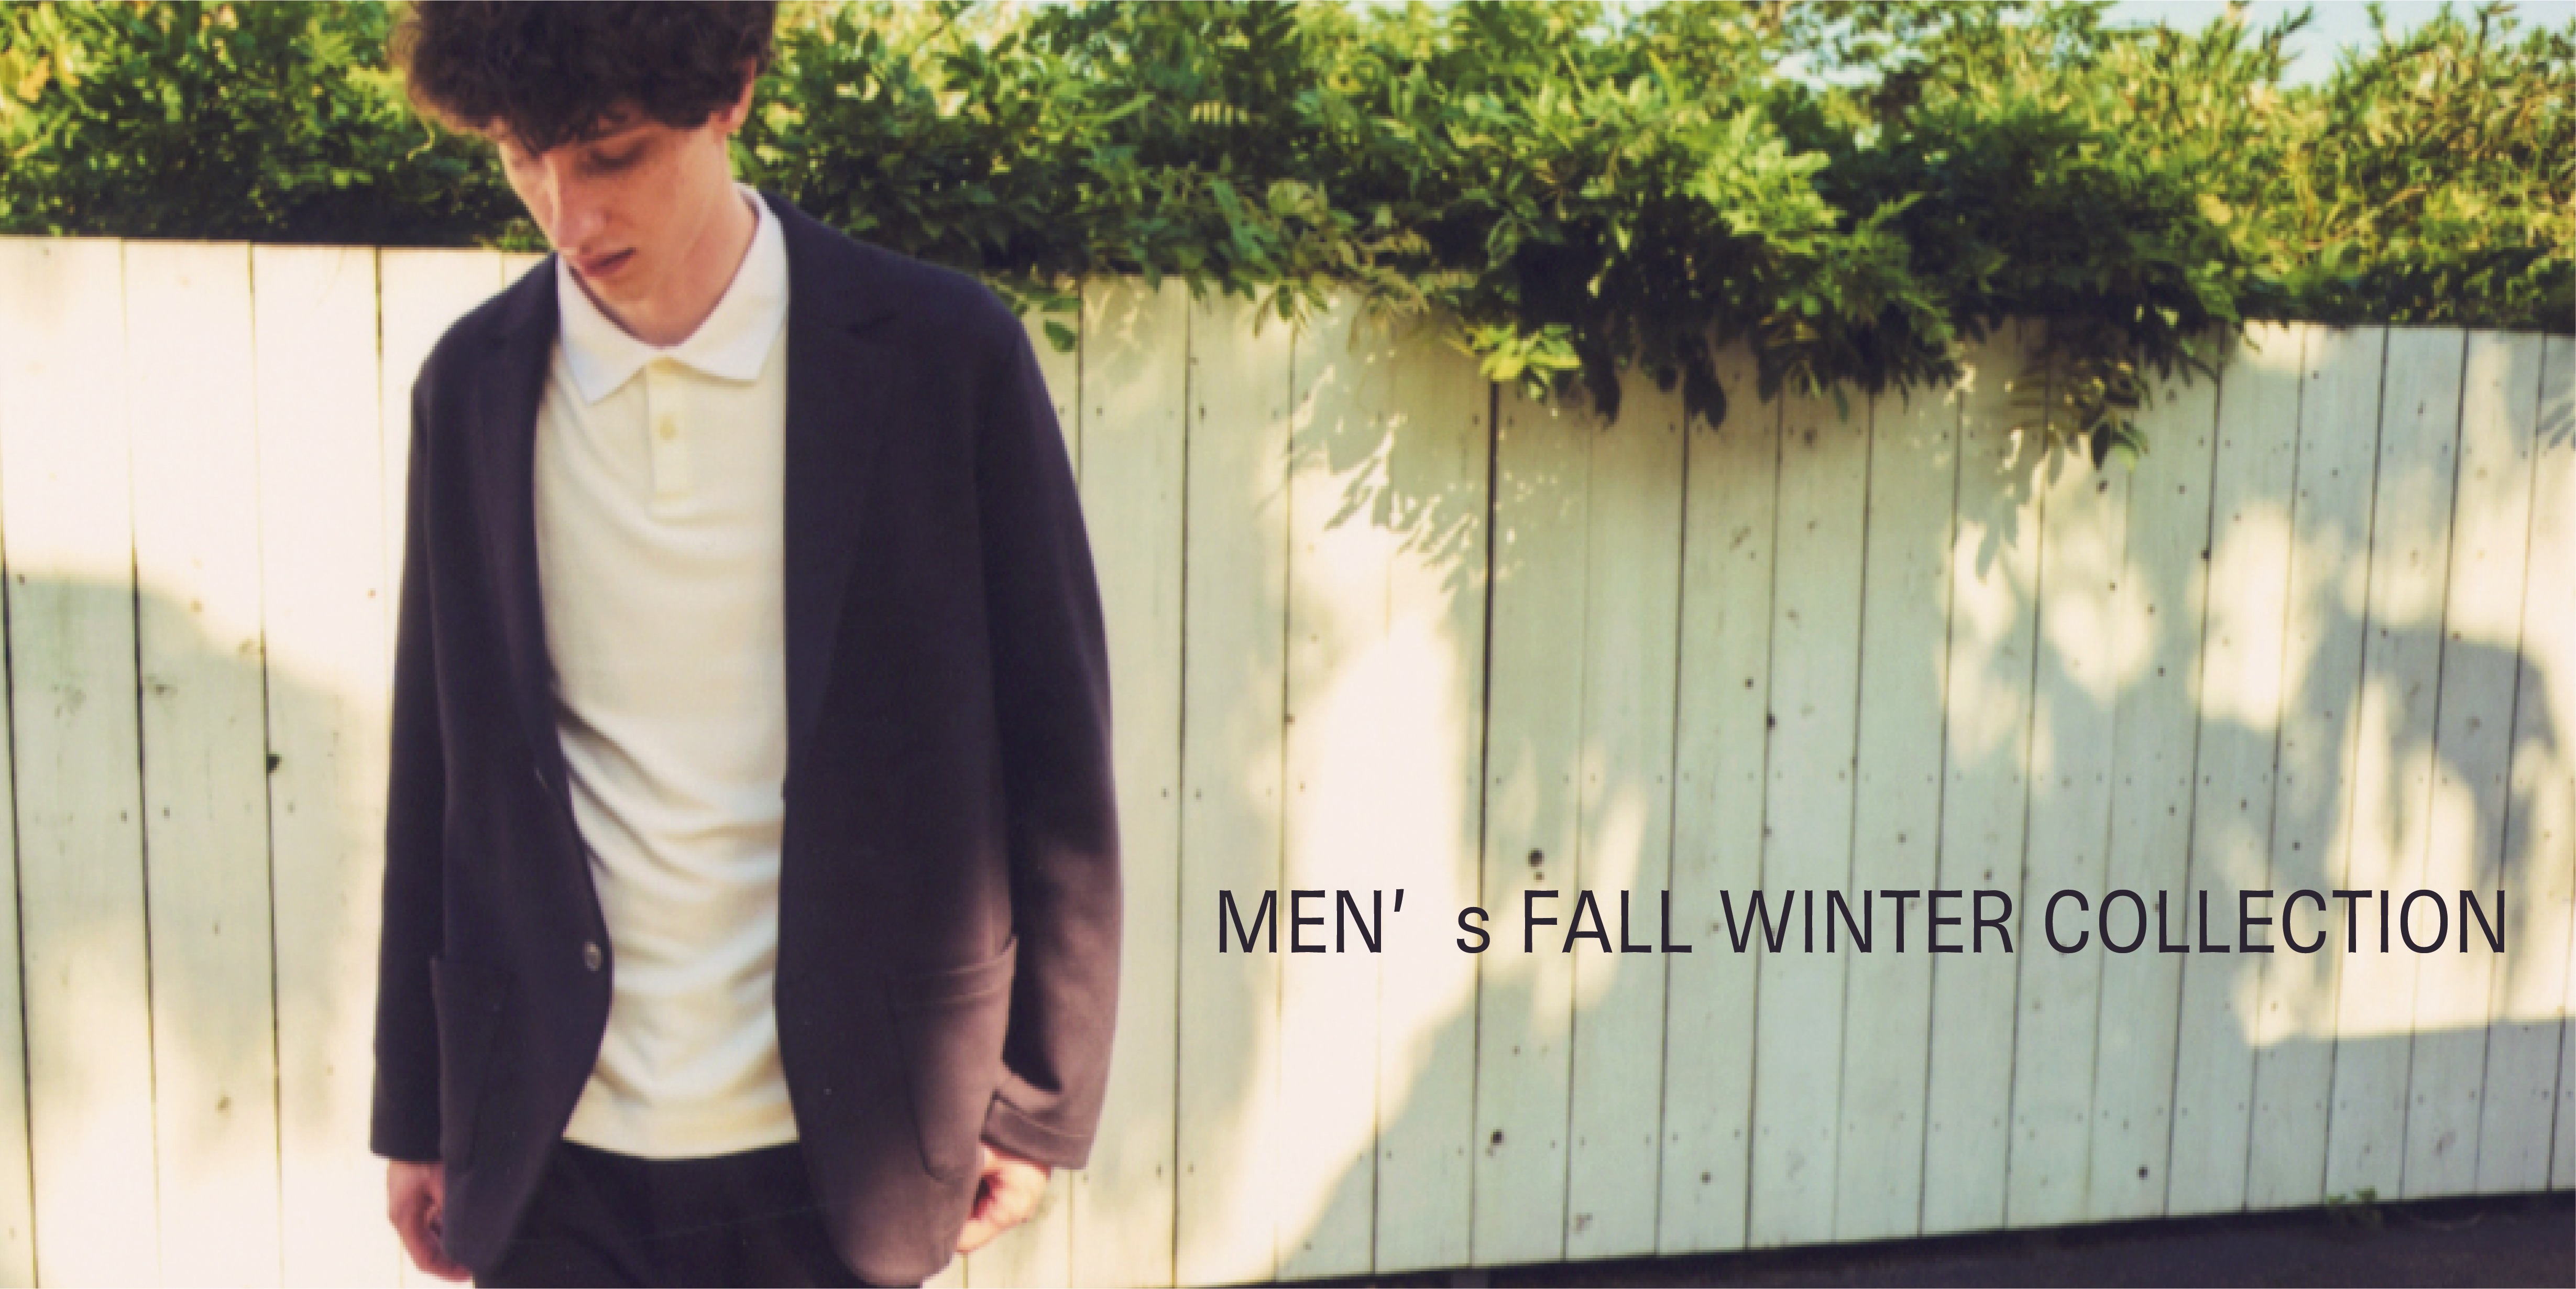 MEN’S FALL WINTER COLLECTION